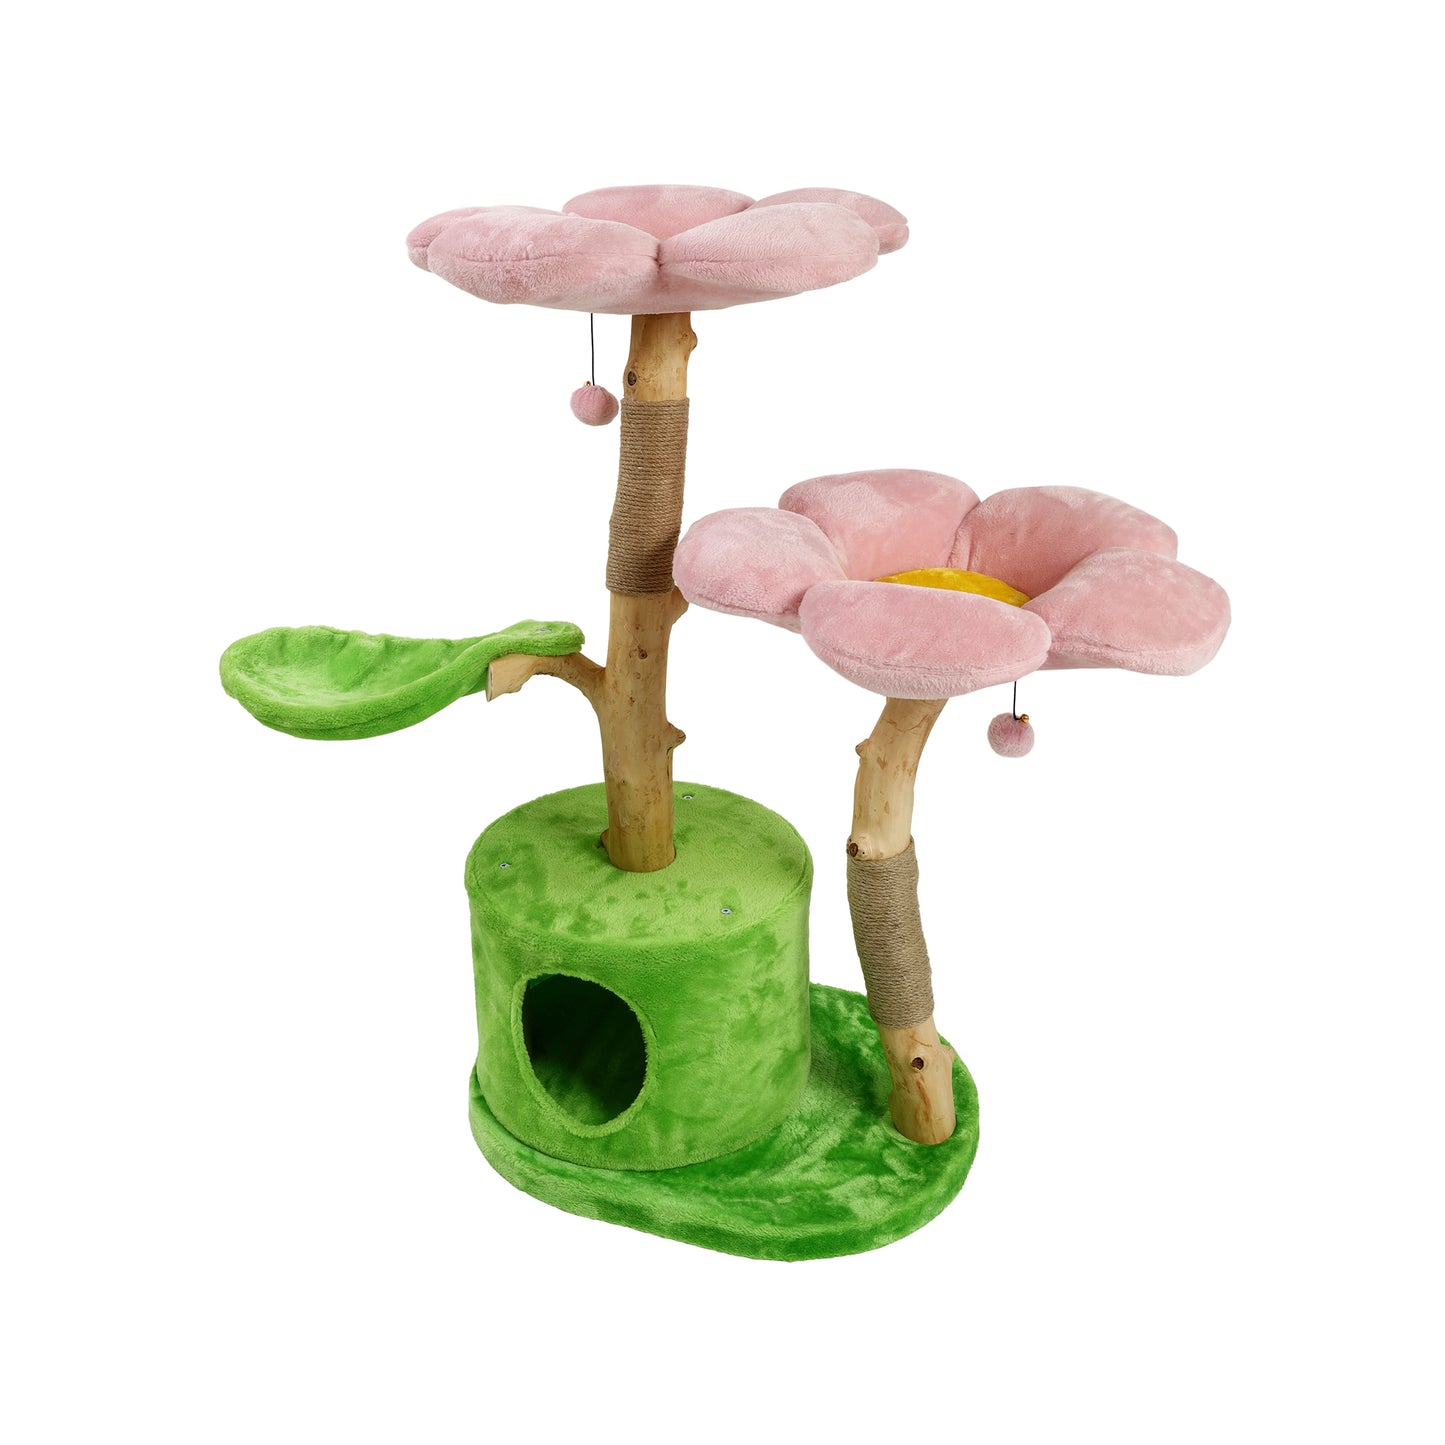 A wooden cat tree with multiple levels for climbing and playing